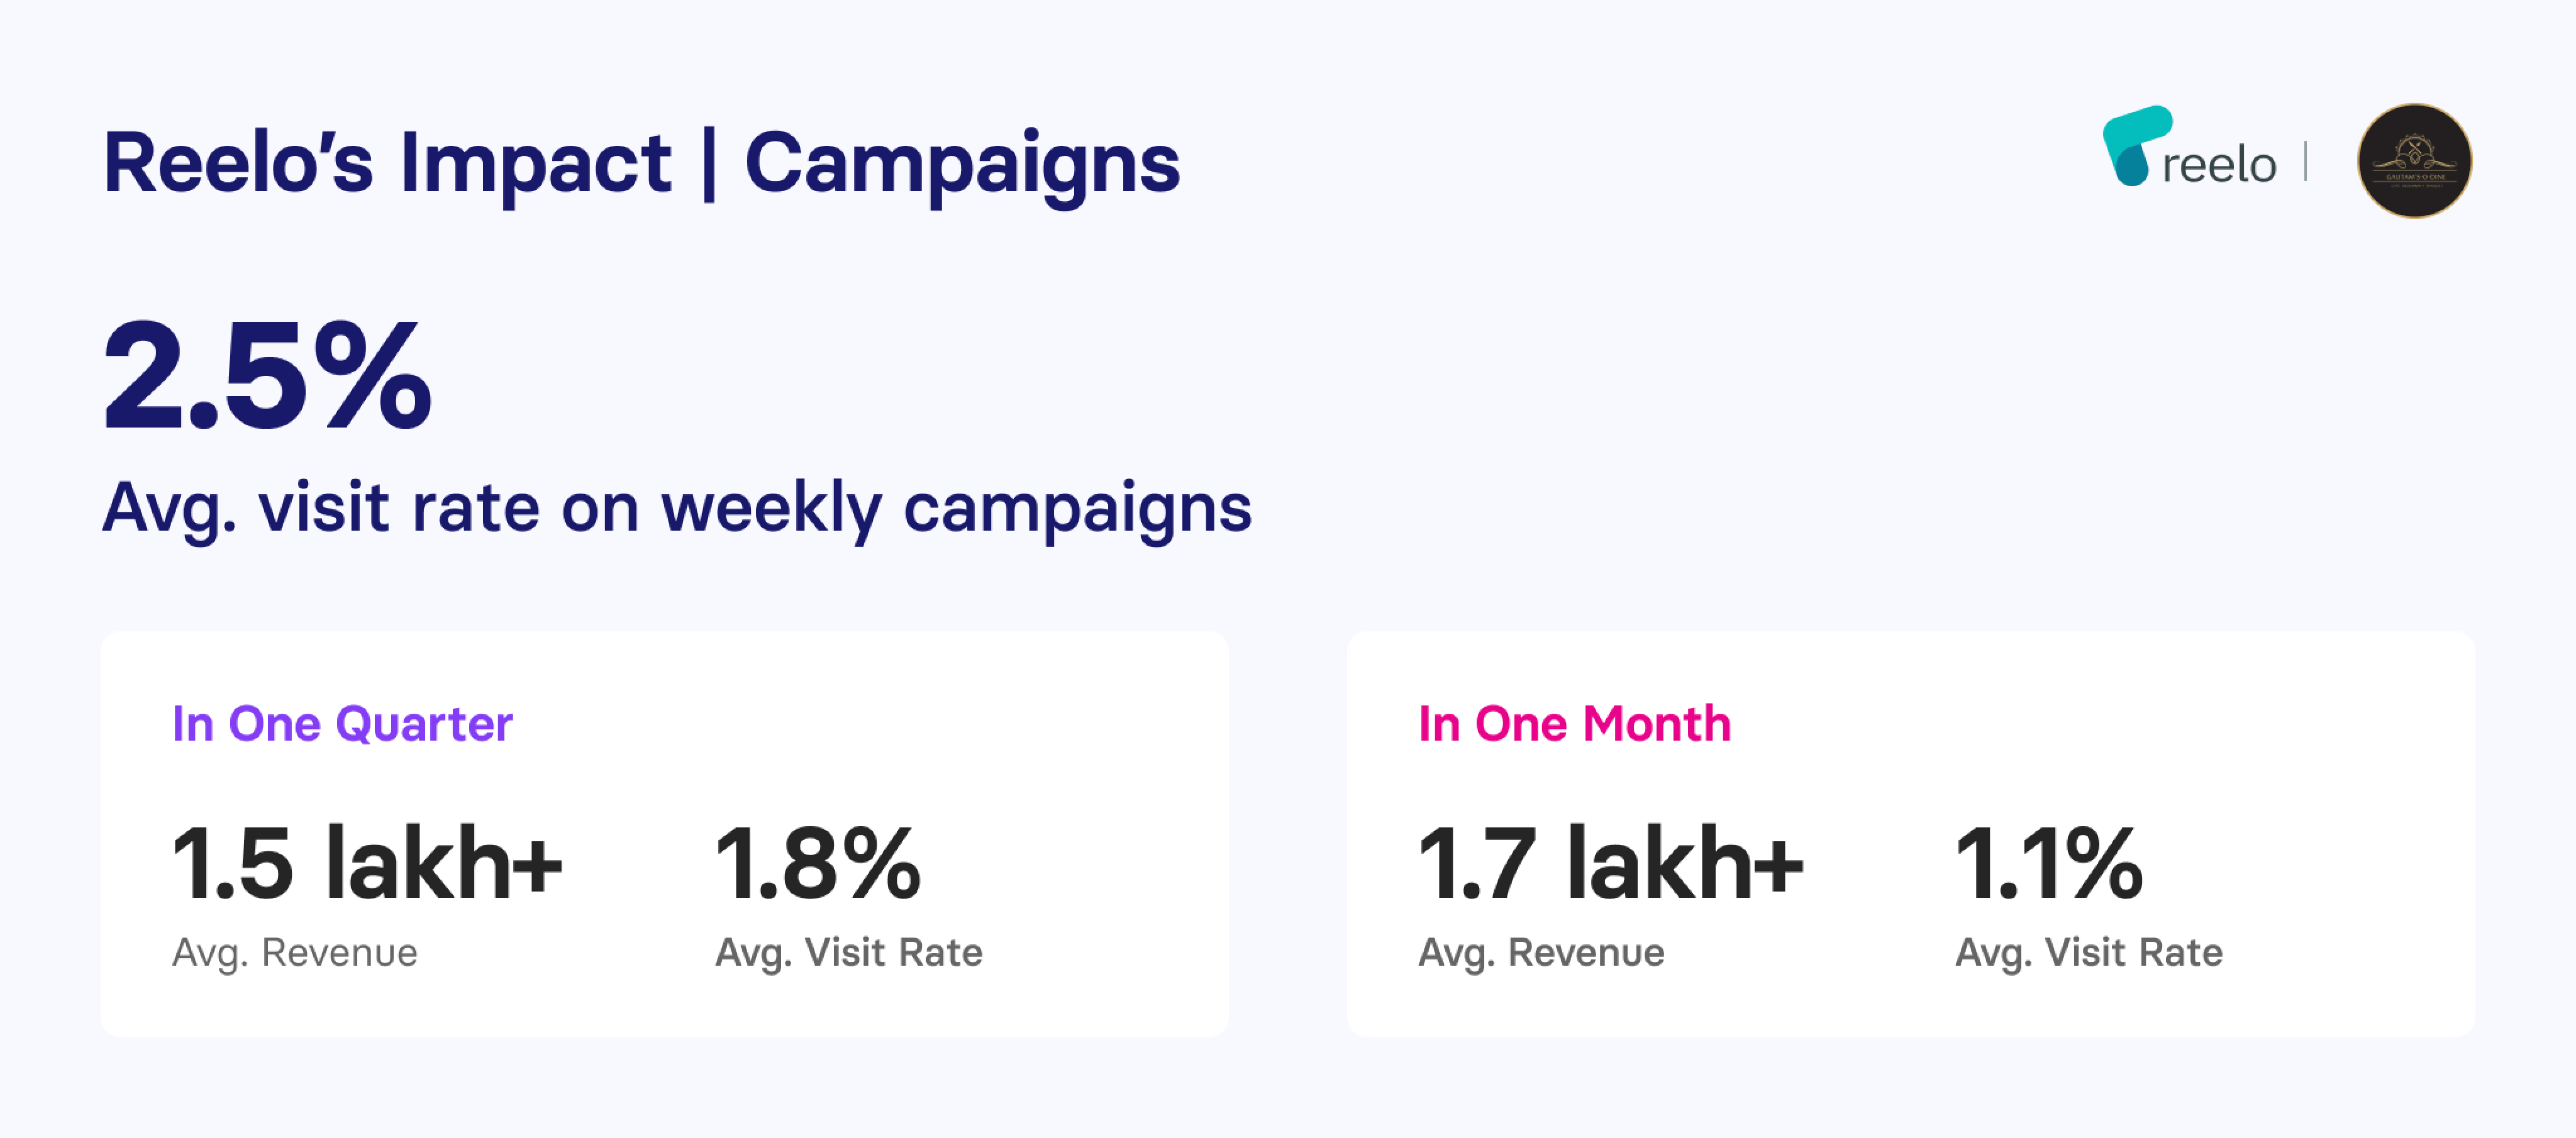 Reelo's Campaign feature helped earn lakhs